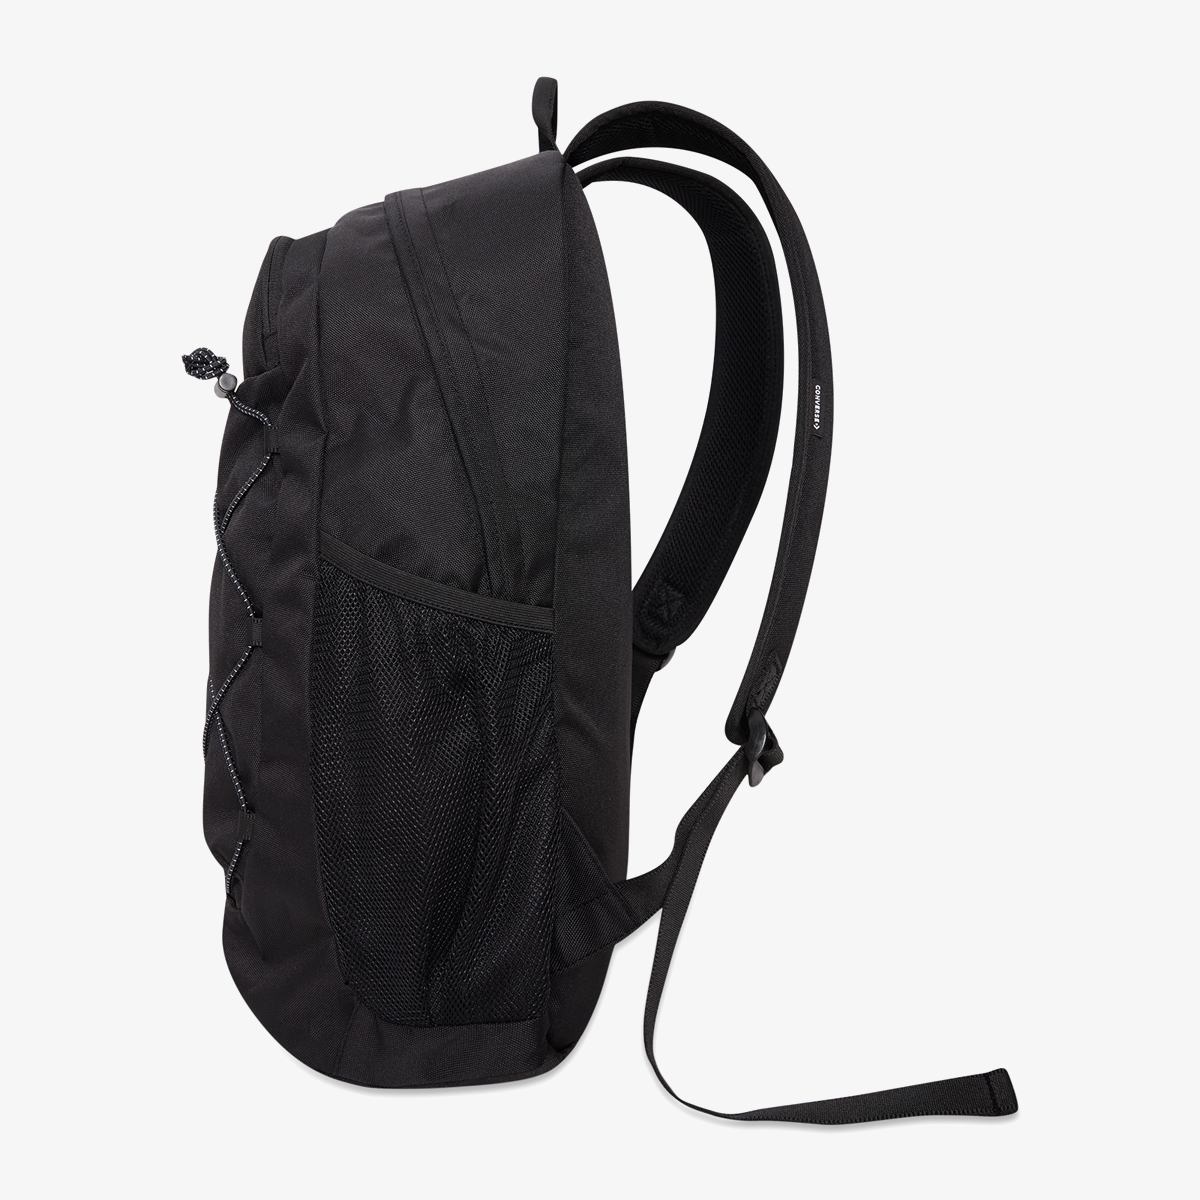 Рюкзак Converse Transition Backpack